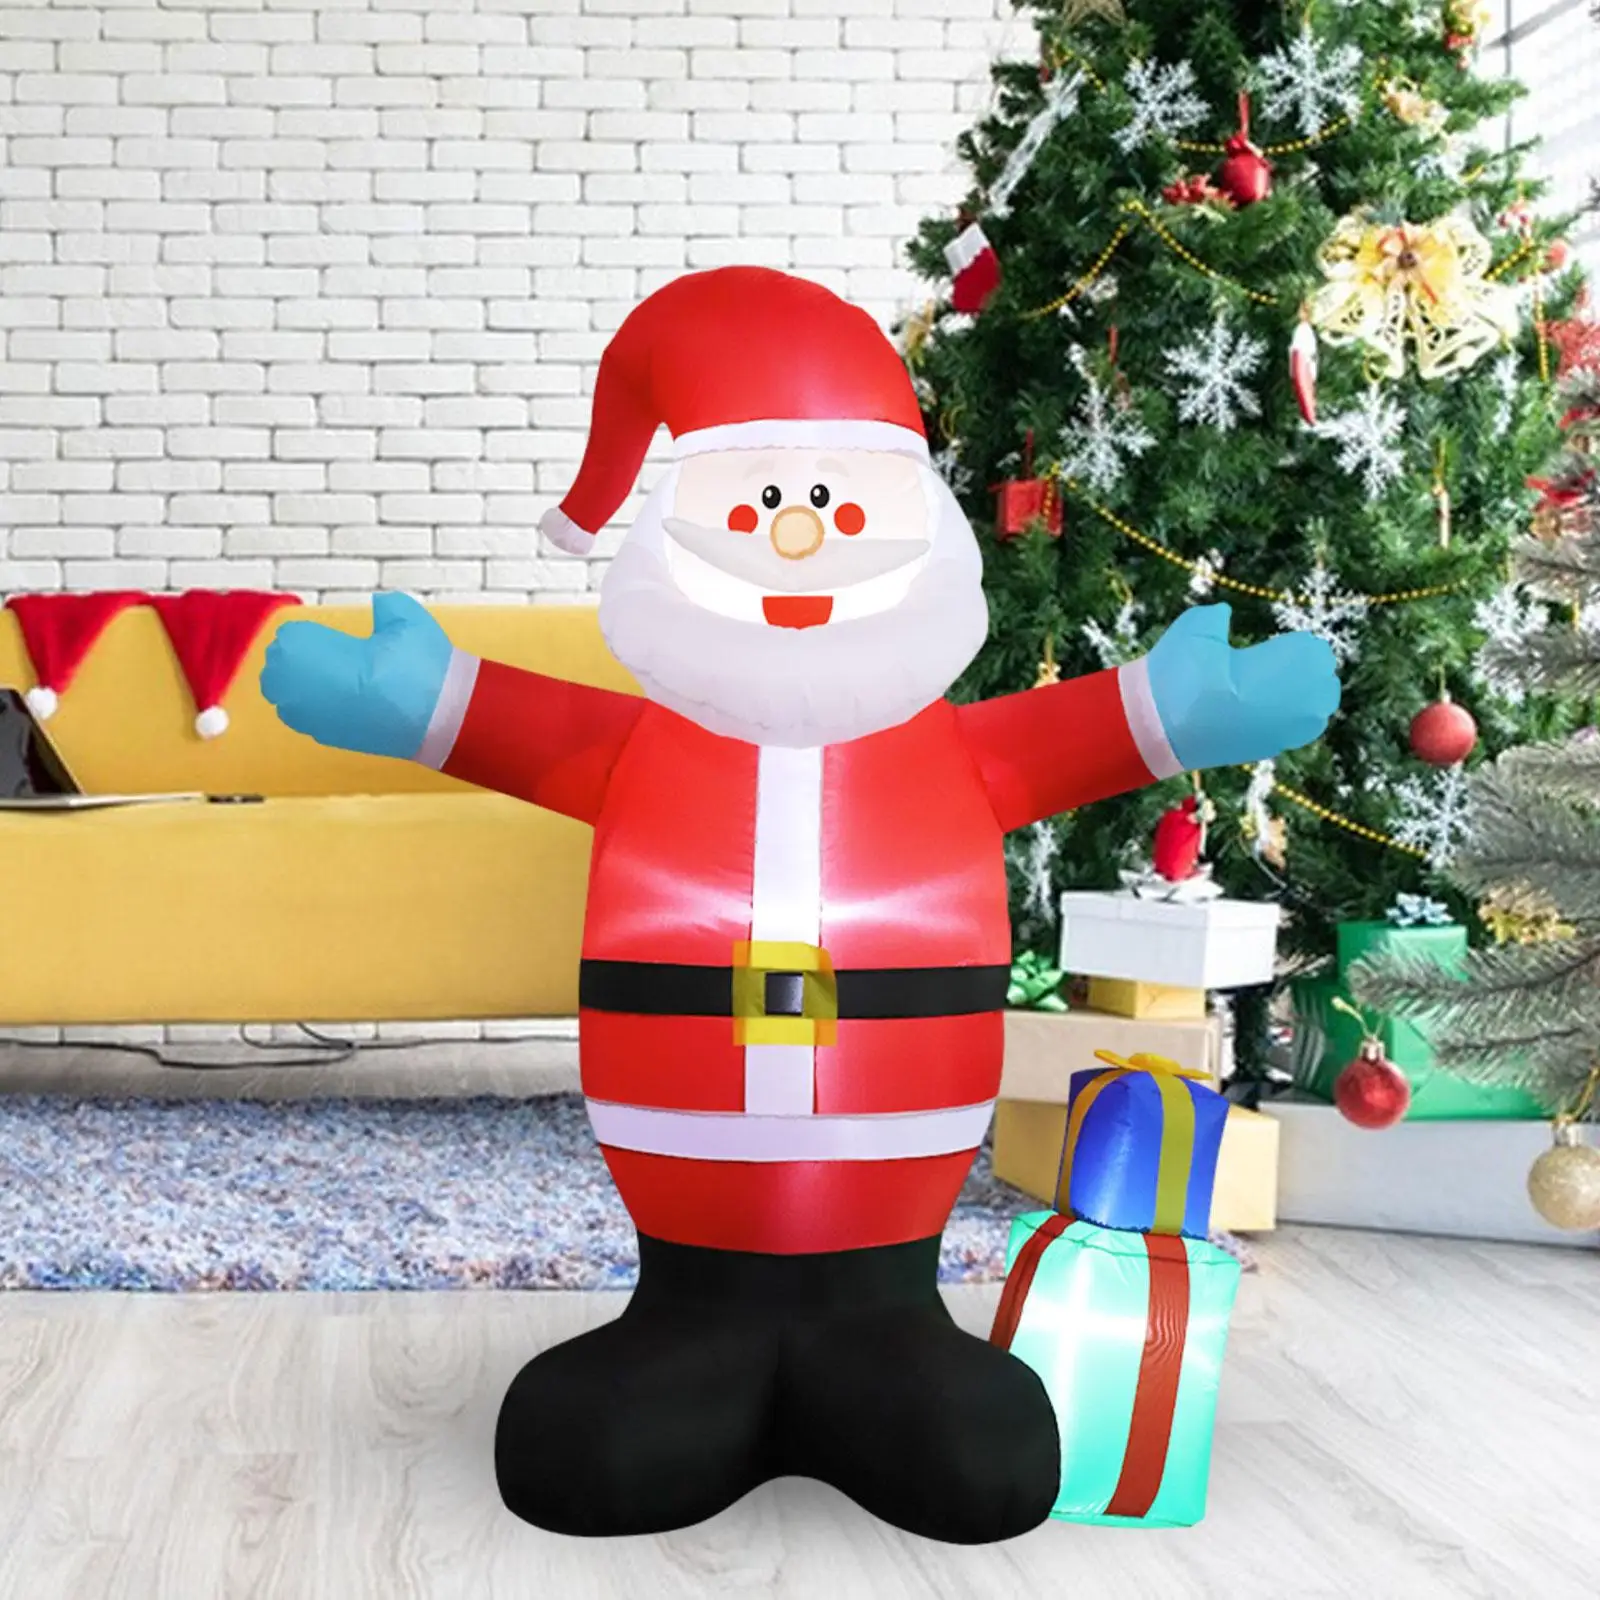 Christmas Inflatable Santa Luminous 4.9ft Tall Props Novelty with LED Lights Xmas Decoration for Garden Yard Outdoor Decor